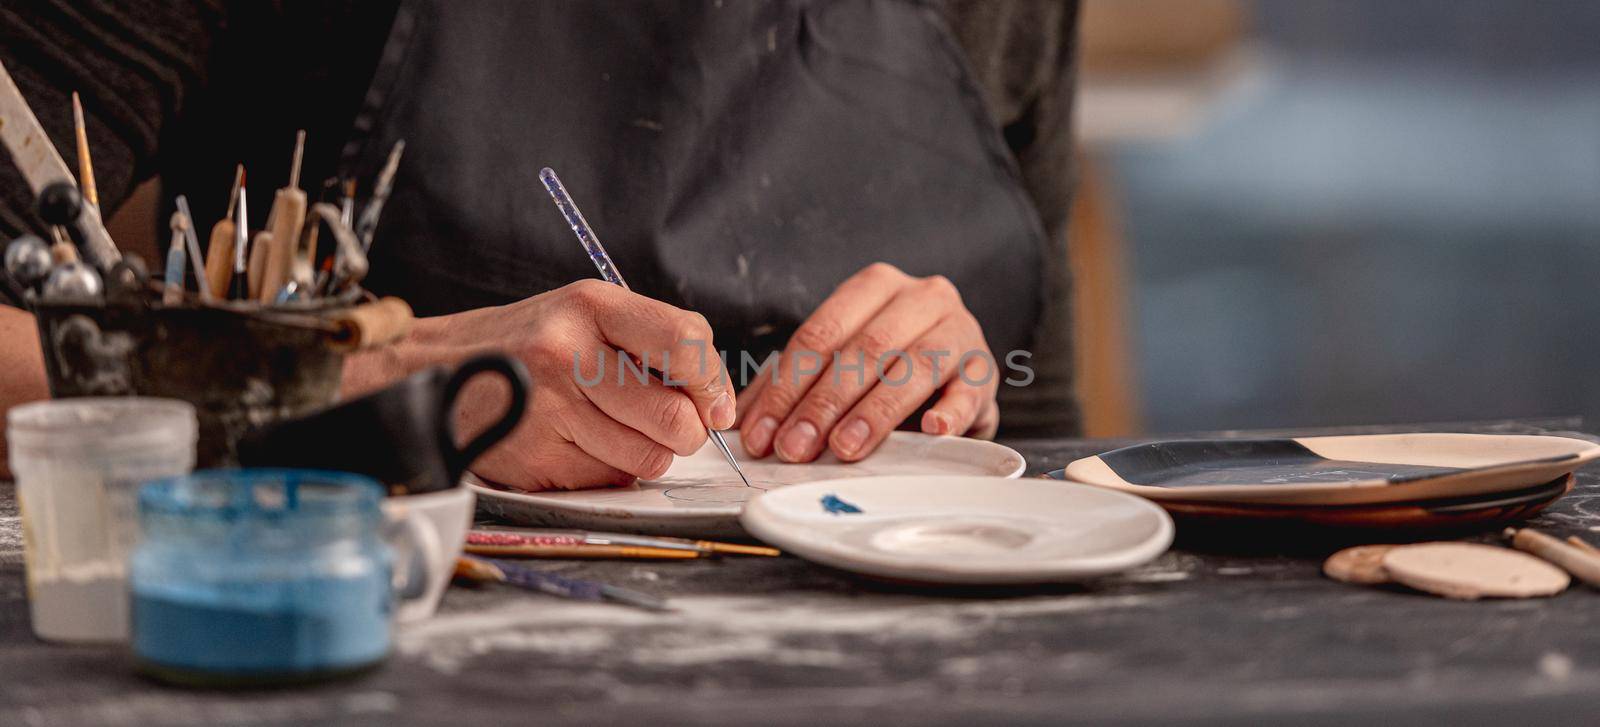 Woman decorating plate with handmade pattern using brush